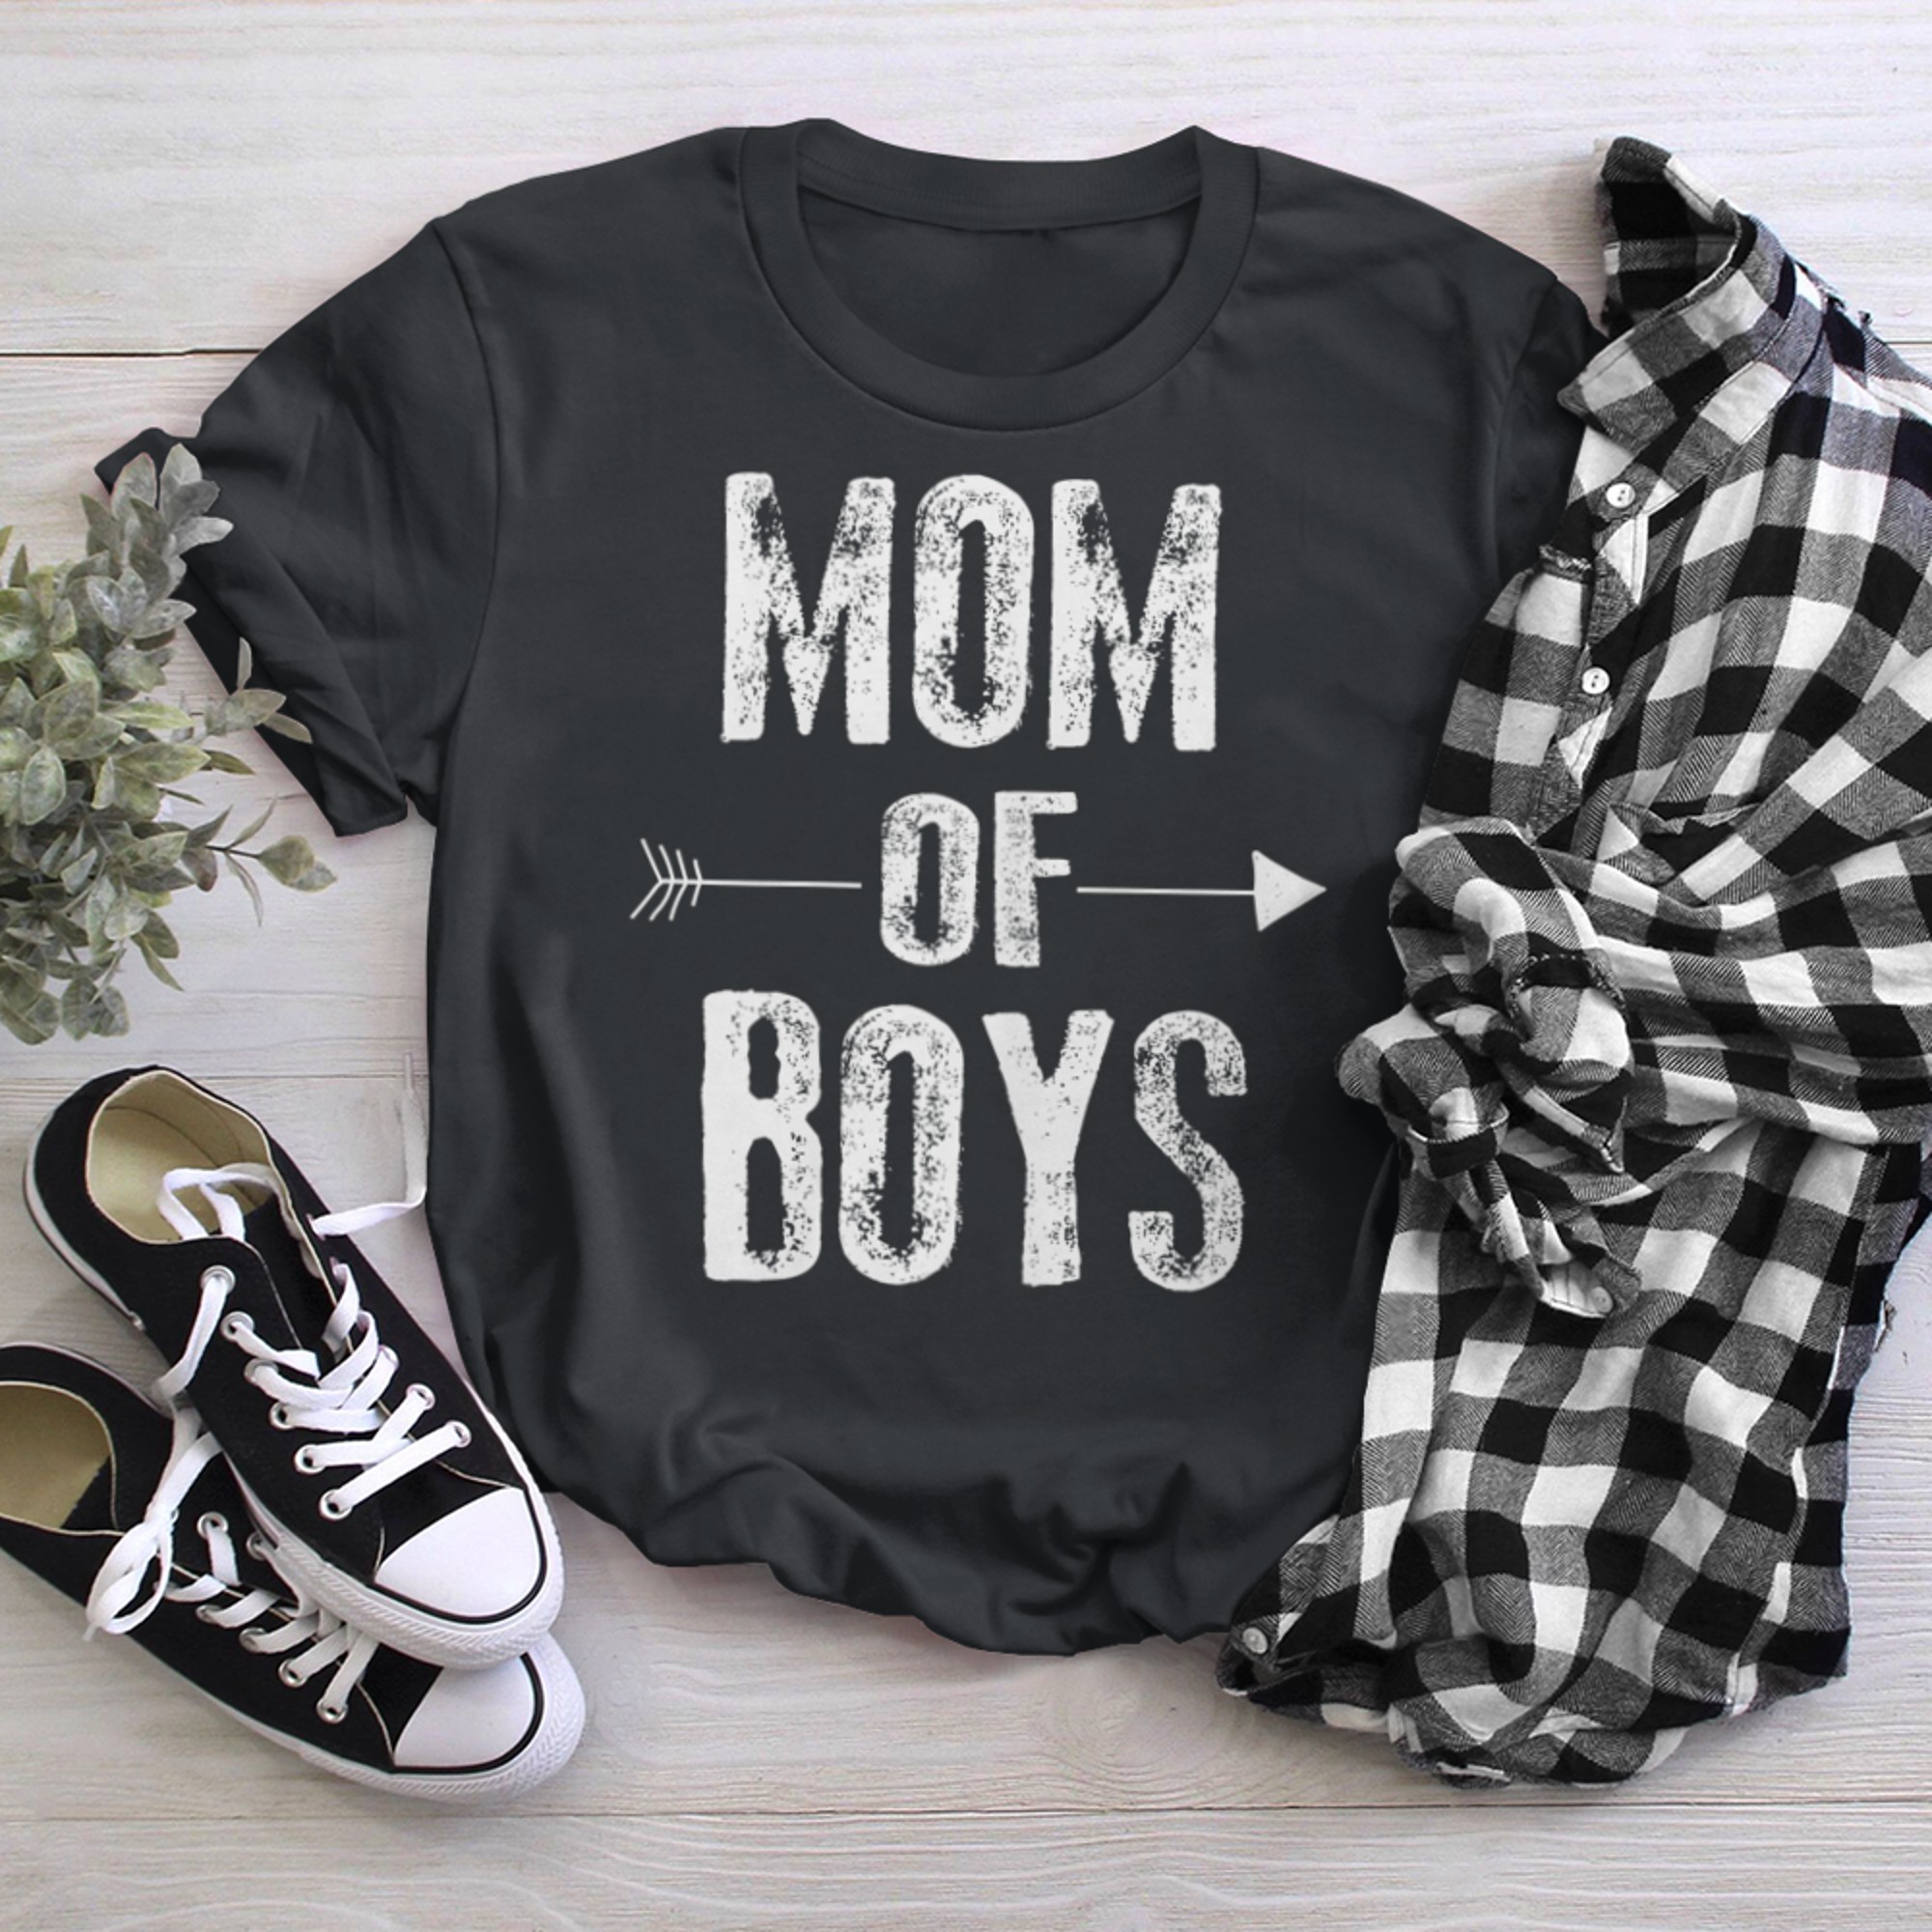 Mom of Funny Mother t-shirt black